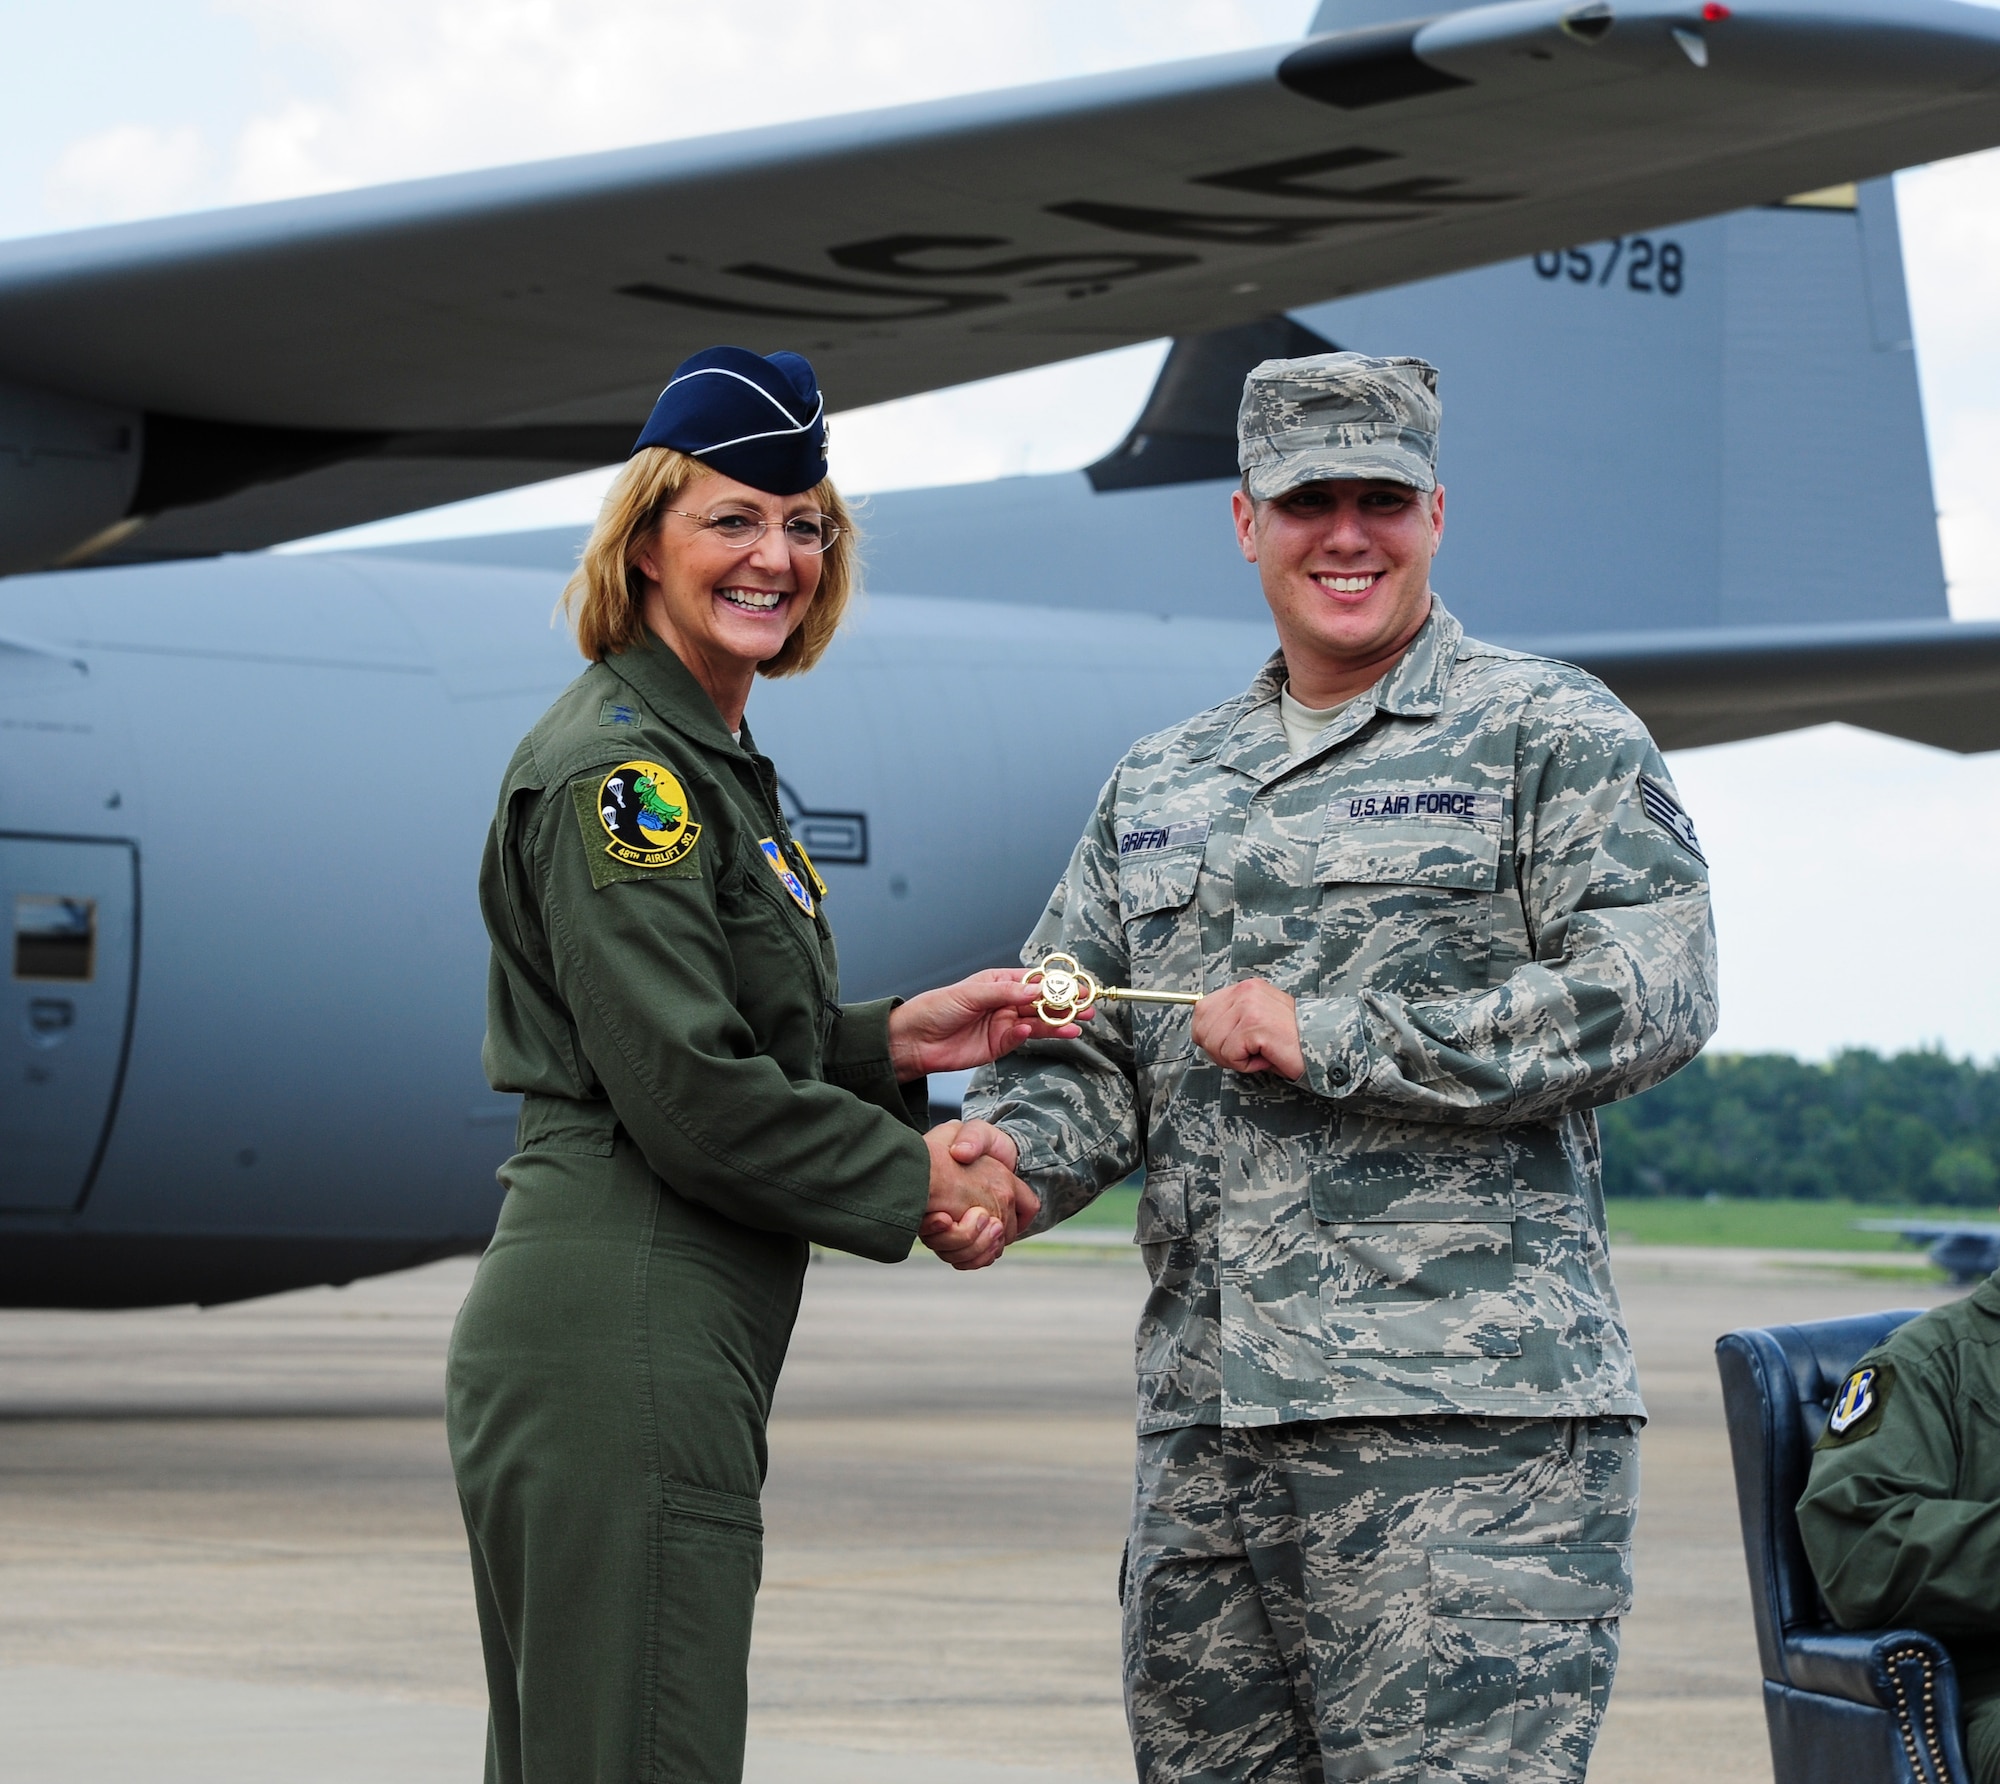 Maj. Gen. Margaret Woodward, director of the Air Force Sexual Assault Prevention and Response Office, presents the “key” to the newest C-130J in the Air Force’s inventory to Staff Sgt. Michael Griffin, 314th Aircraft Maintenance Squadron crew chief Aug. 20, 2013, at Little Rock Air Force Base, Ark. The aircraft was signed by civic partners, Team Little Rock leadership and a 41st Airlift Squadron aircrew. (U.S. Air Force photo by Airman 1st Class Kaylee Clark)